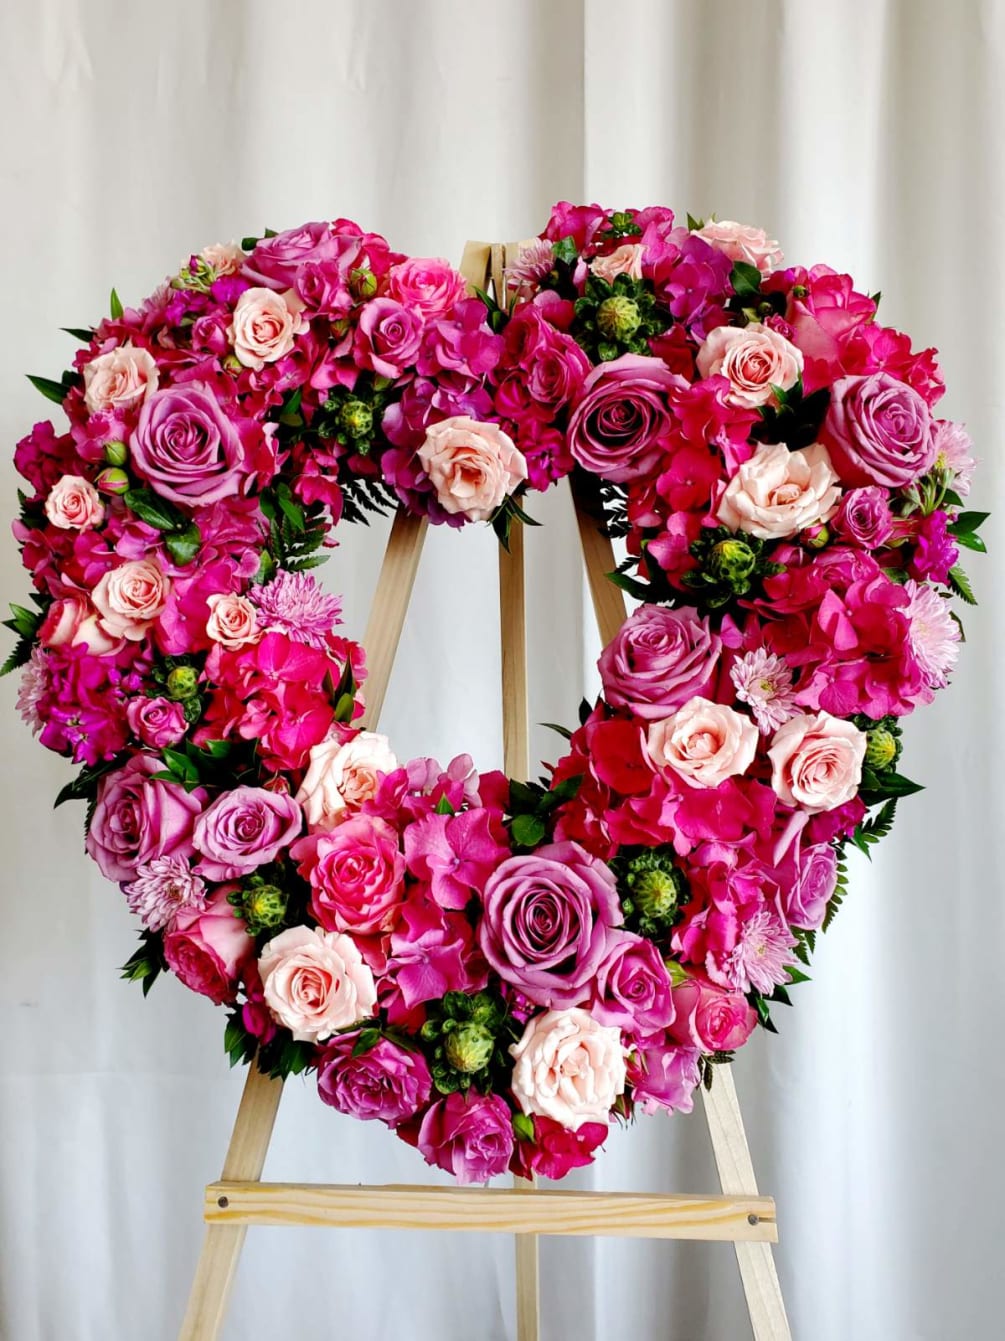 This beautiful heart wreath is expertly curated to represent your loving sentiments.